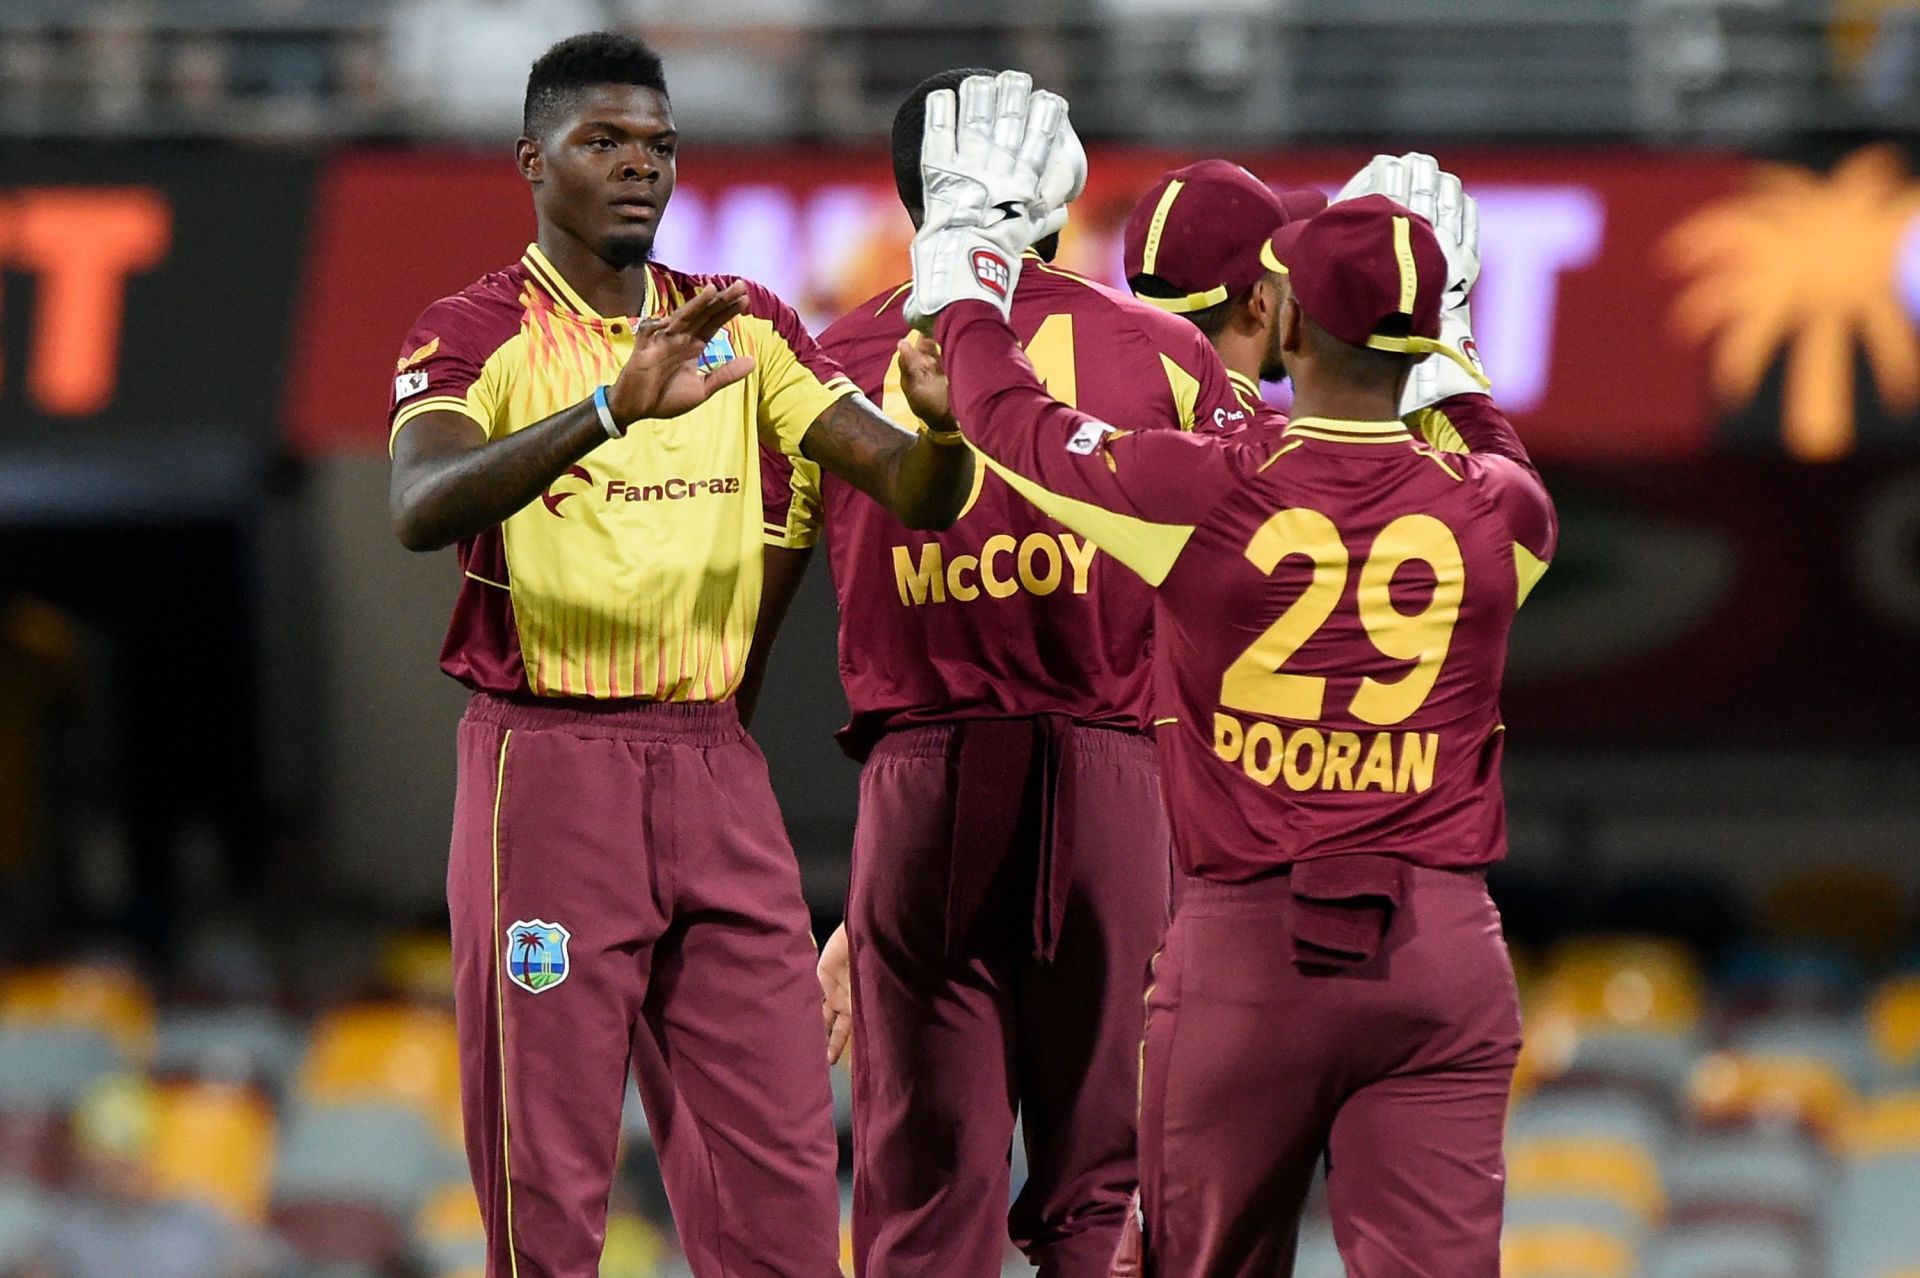 The West Indies failed to qualify for the main group phase of the 2022 T20 World Cup. [P/C: Getty]